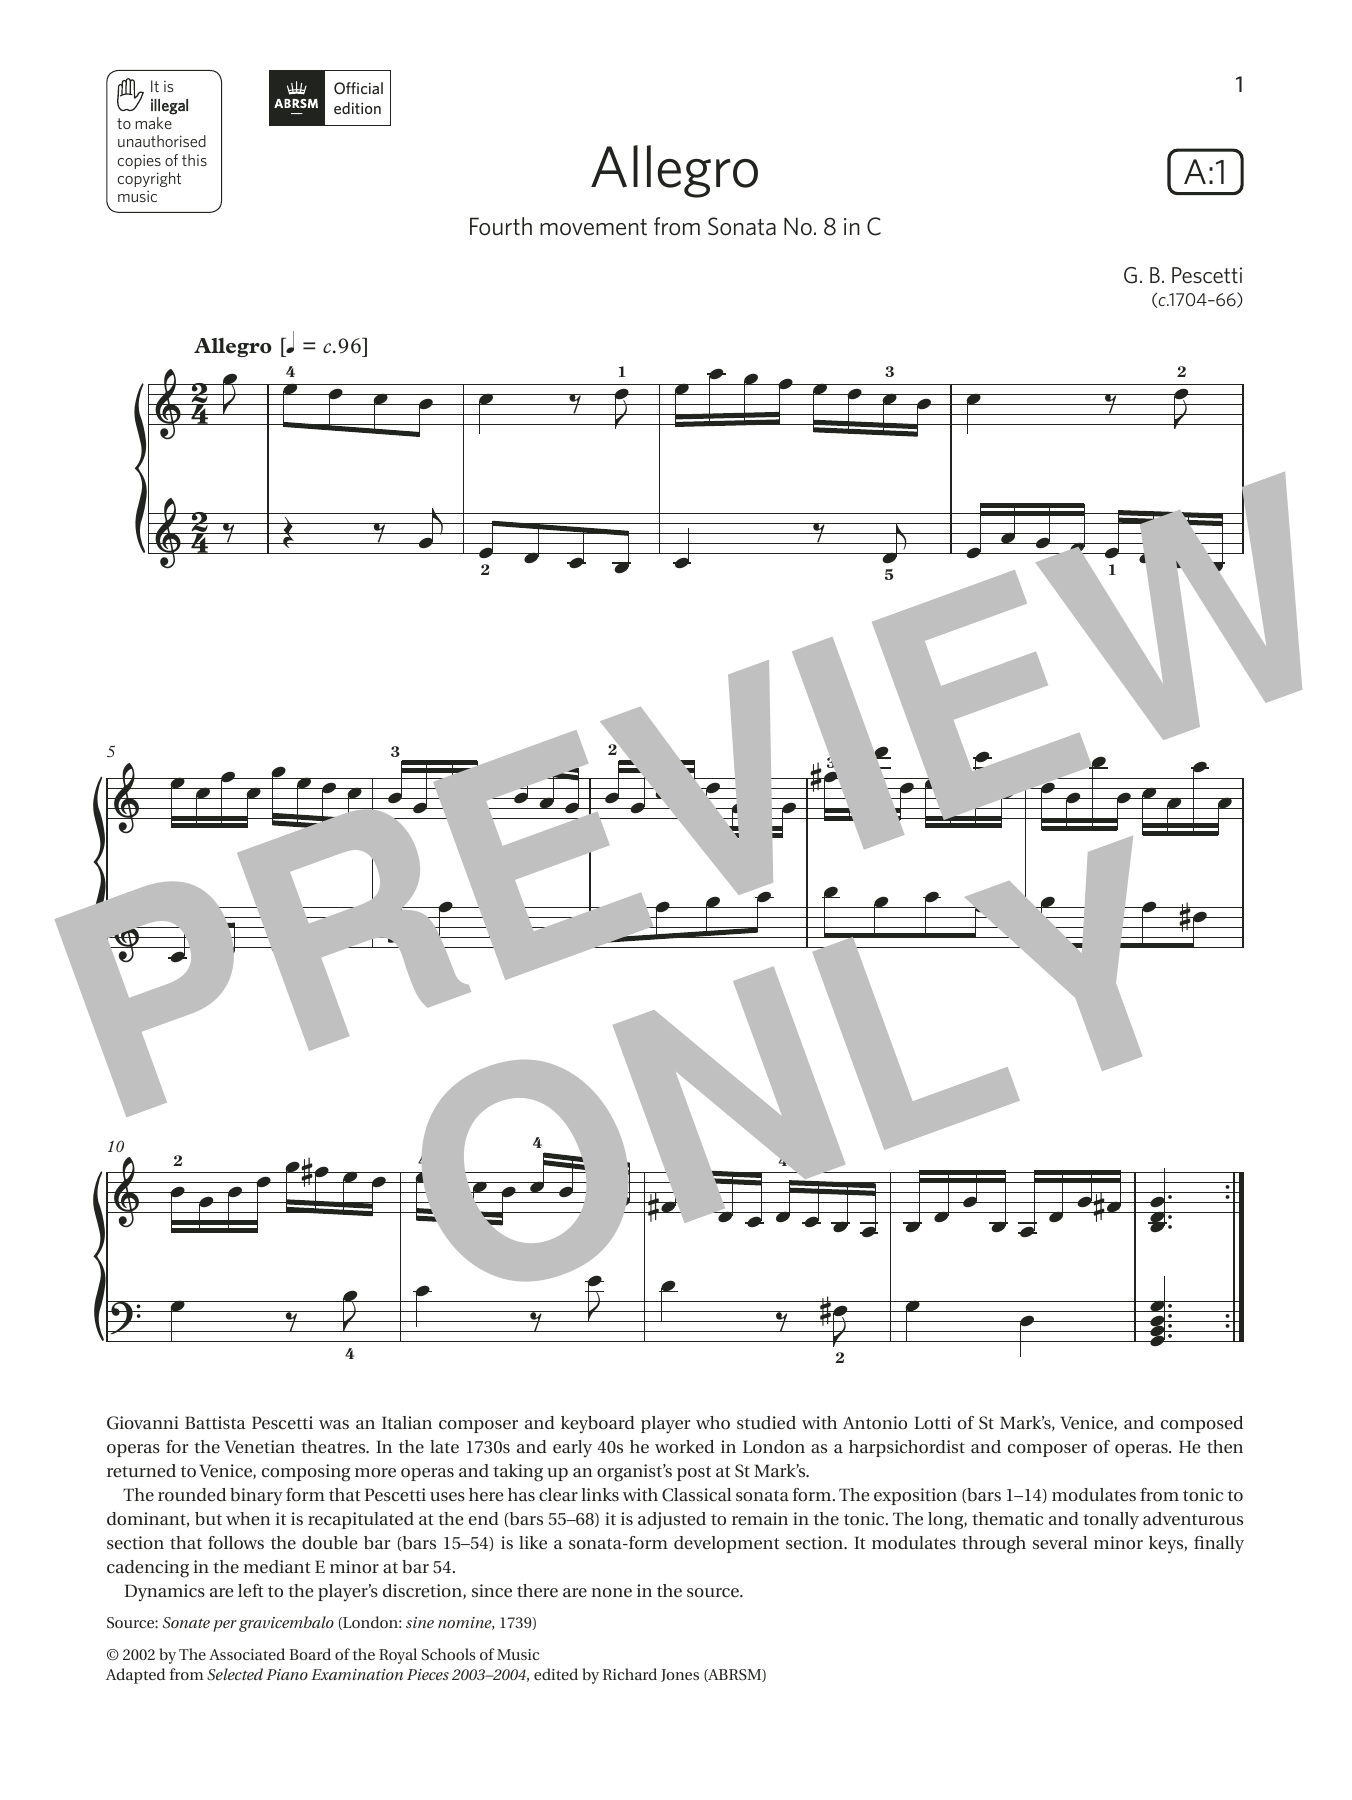 Download G. B. Pescetti Allegro (Grade 6, list A1, from the ABR Sheet Music